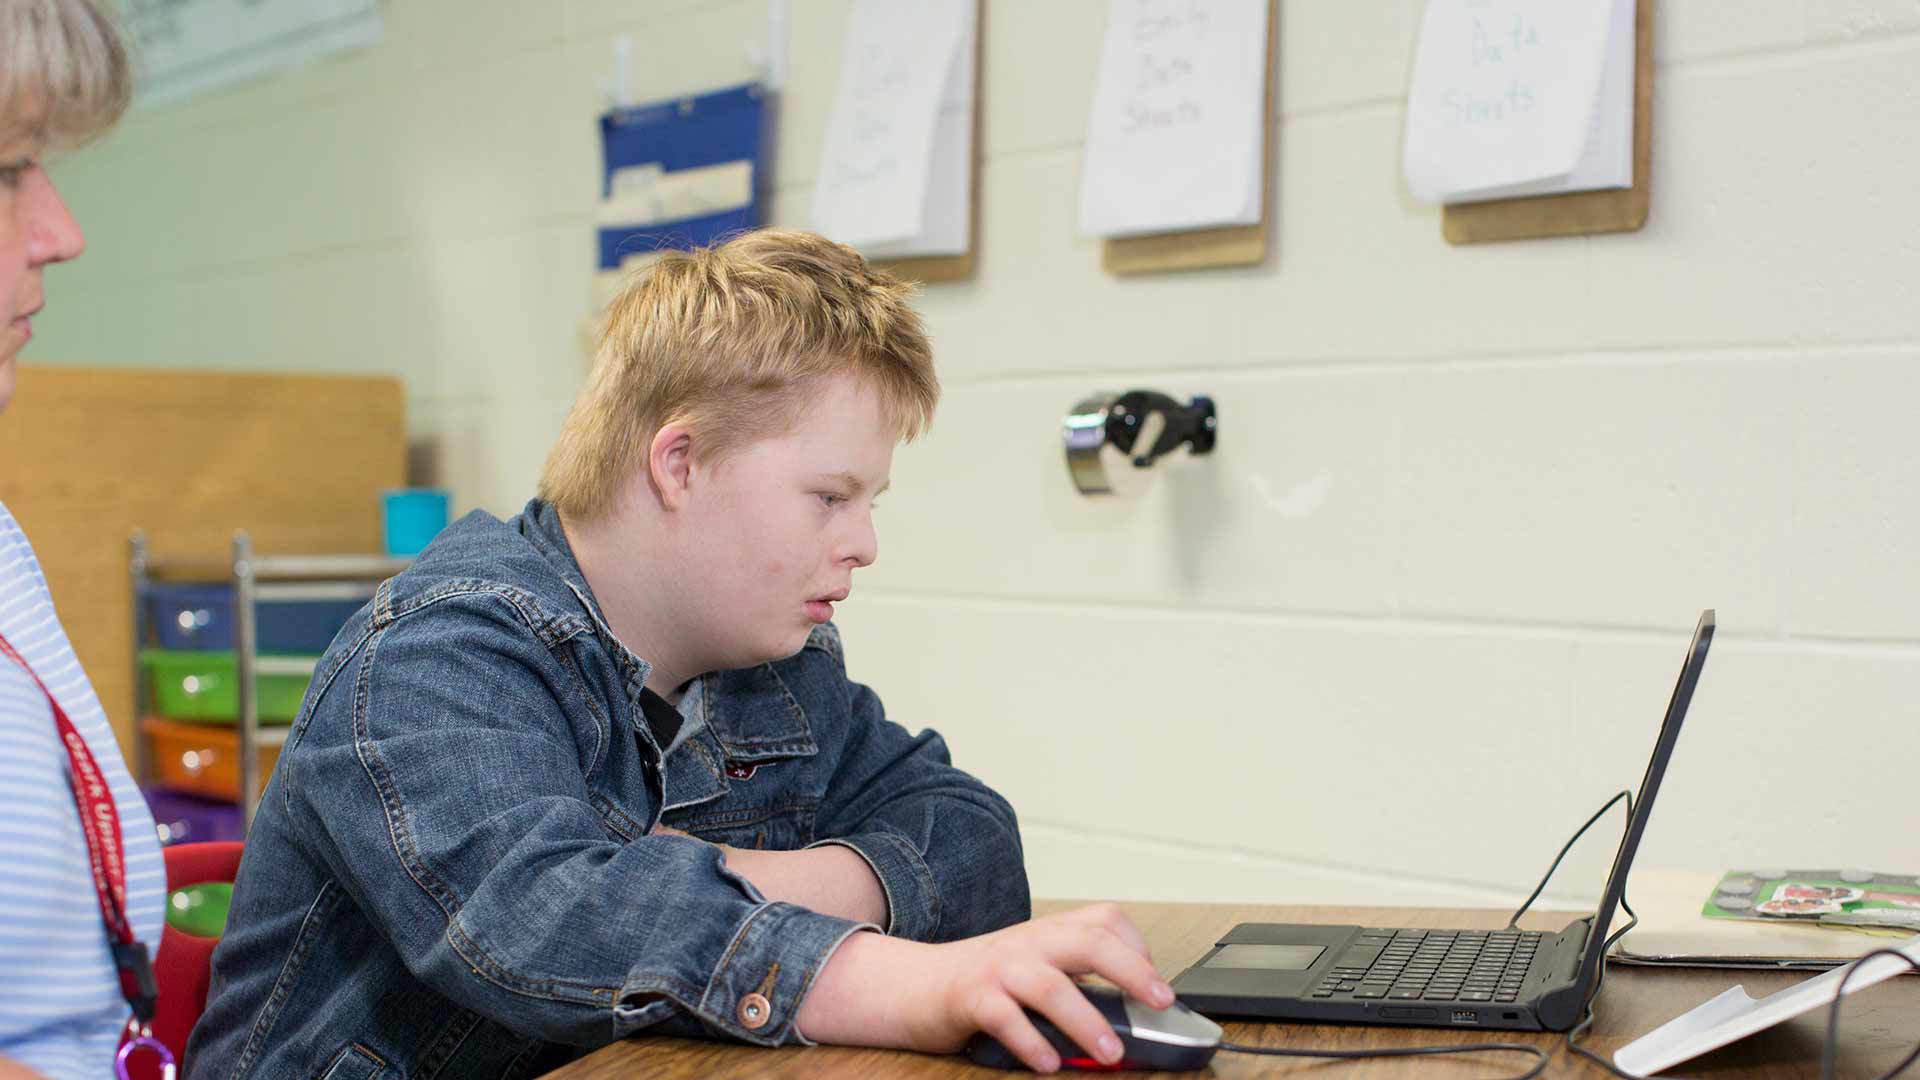 Special education student doing class work on laptop.